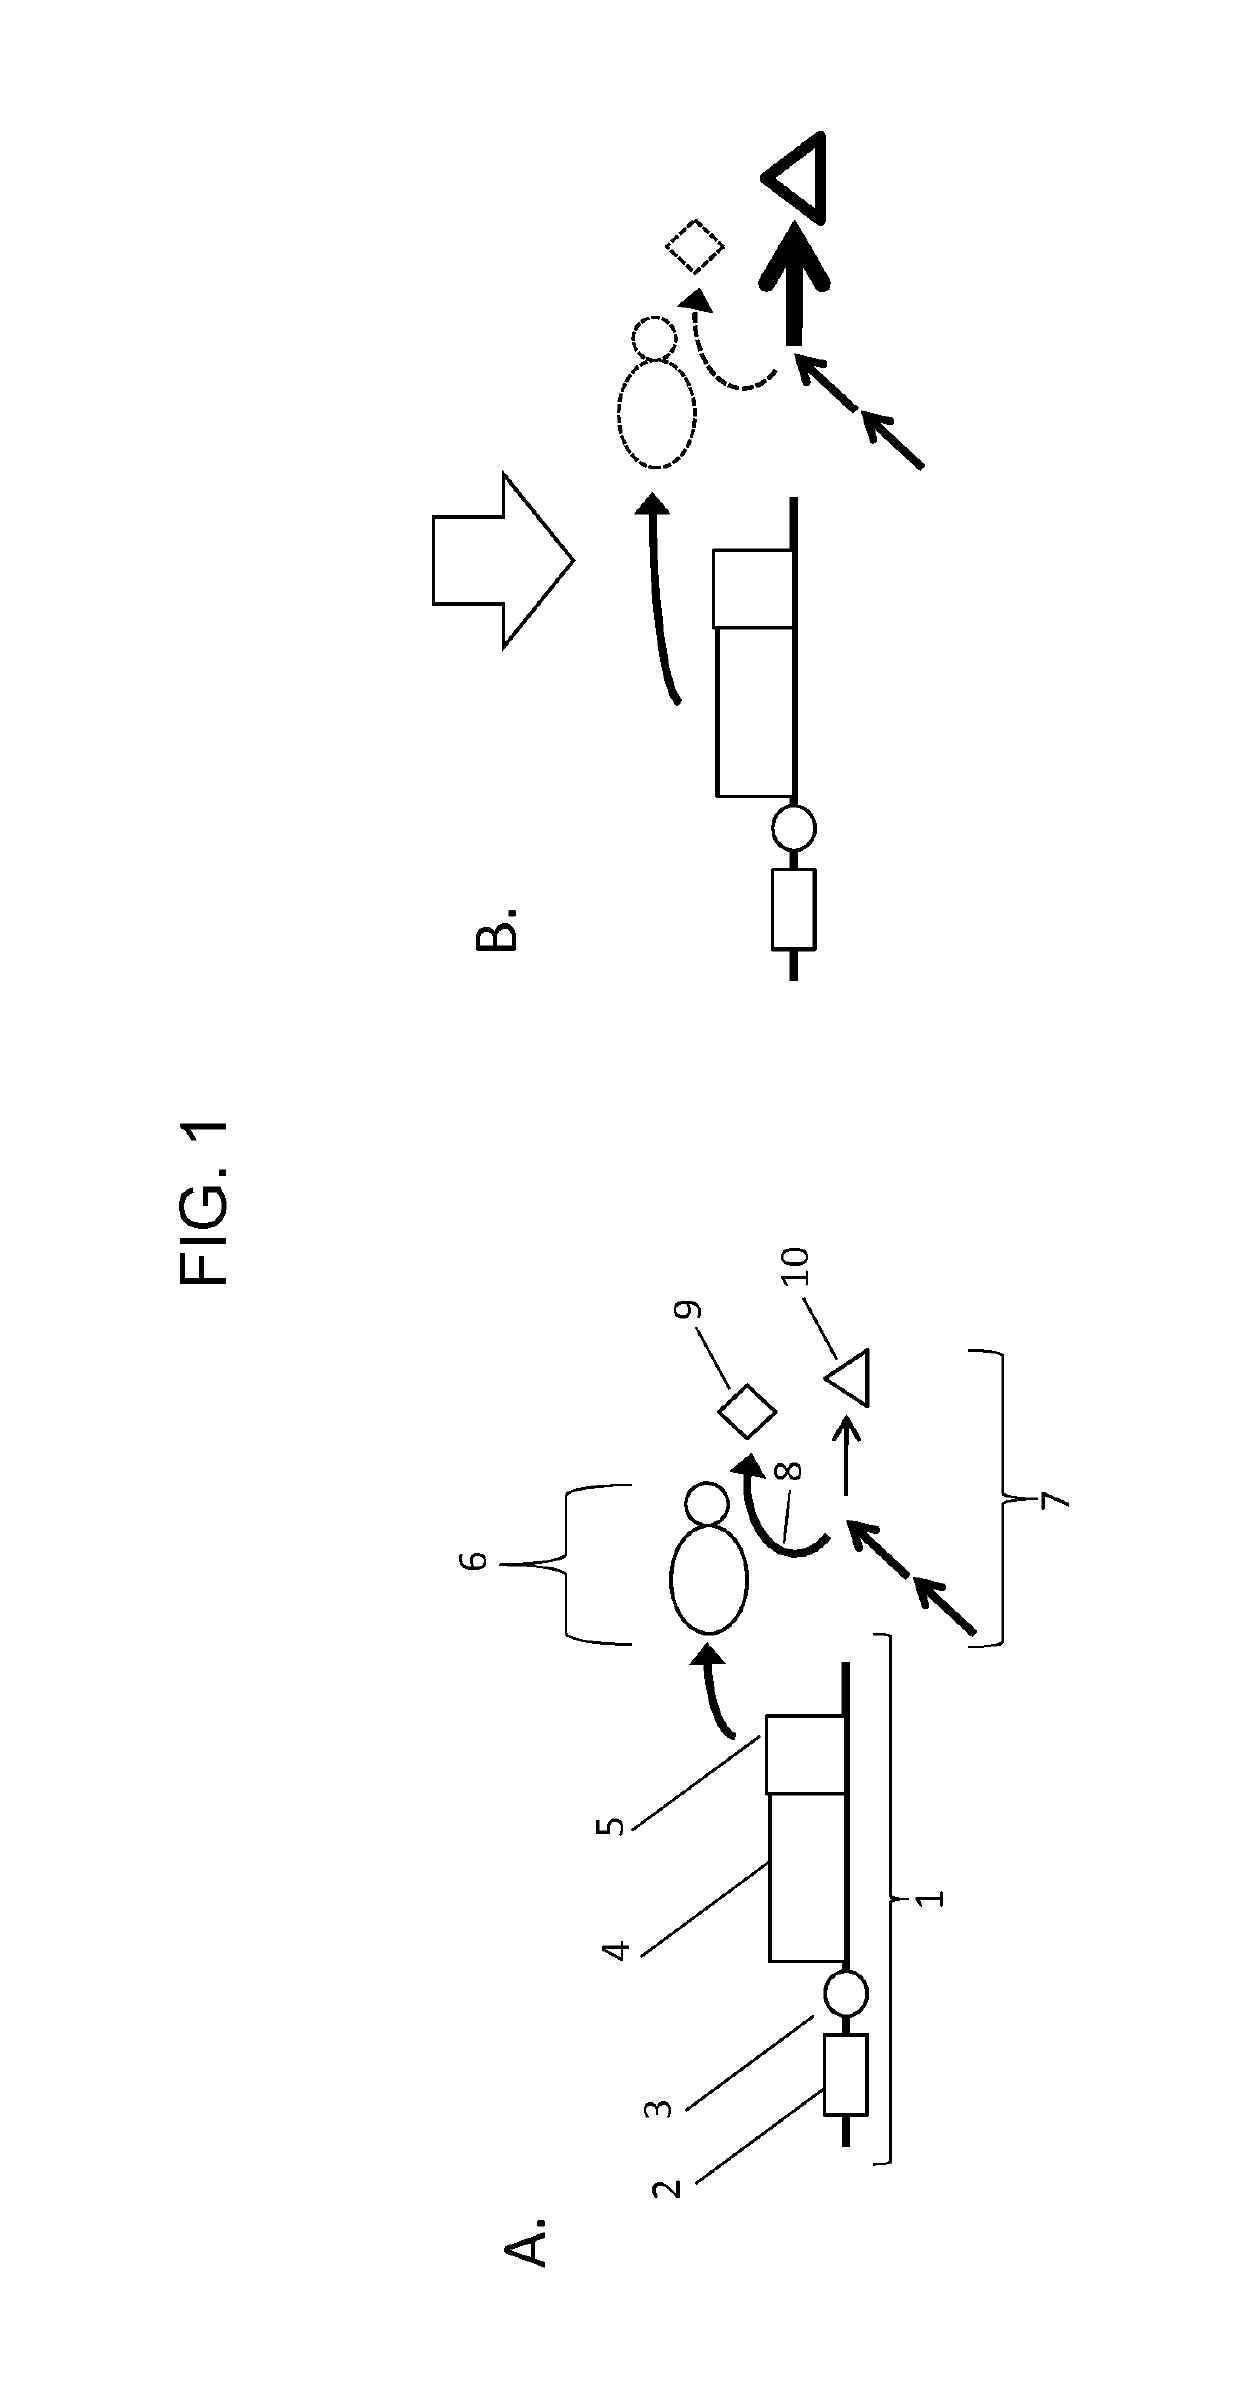 Methods and molecules for yield improvement involving metabolic engineering